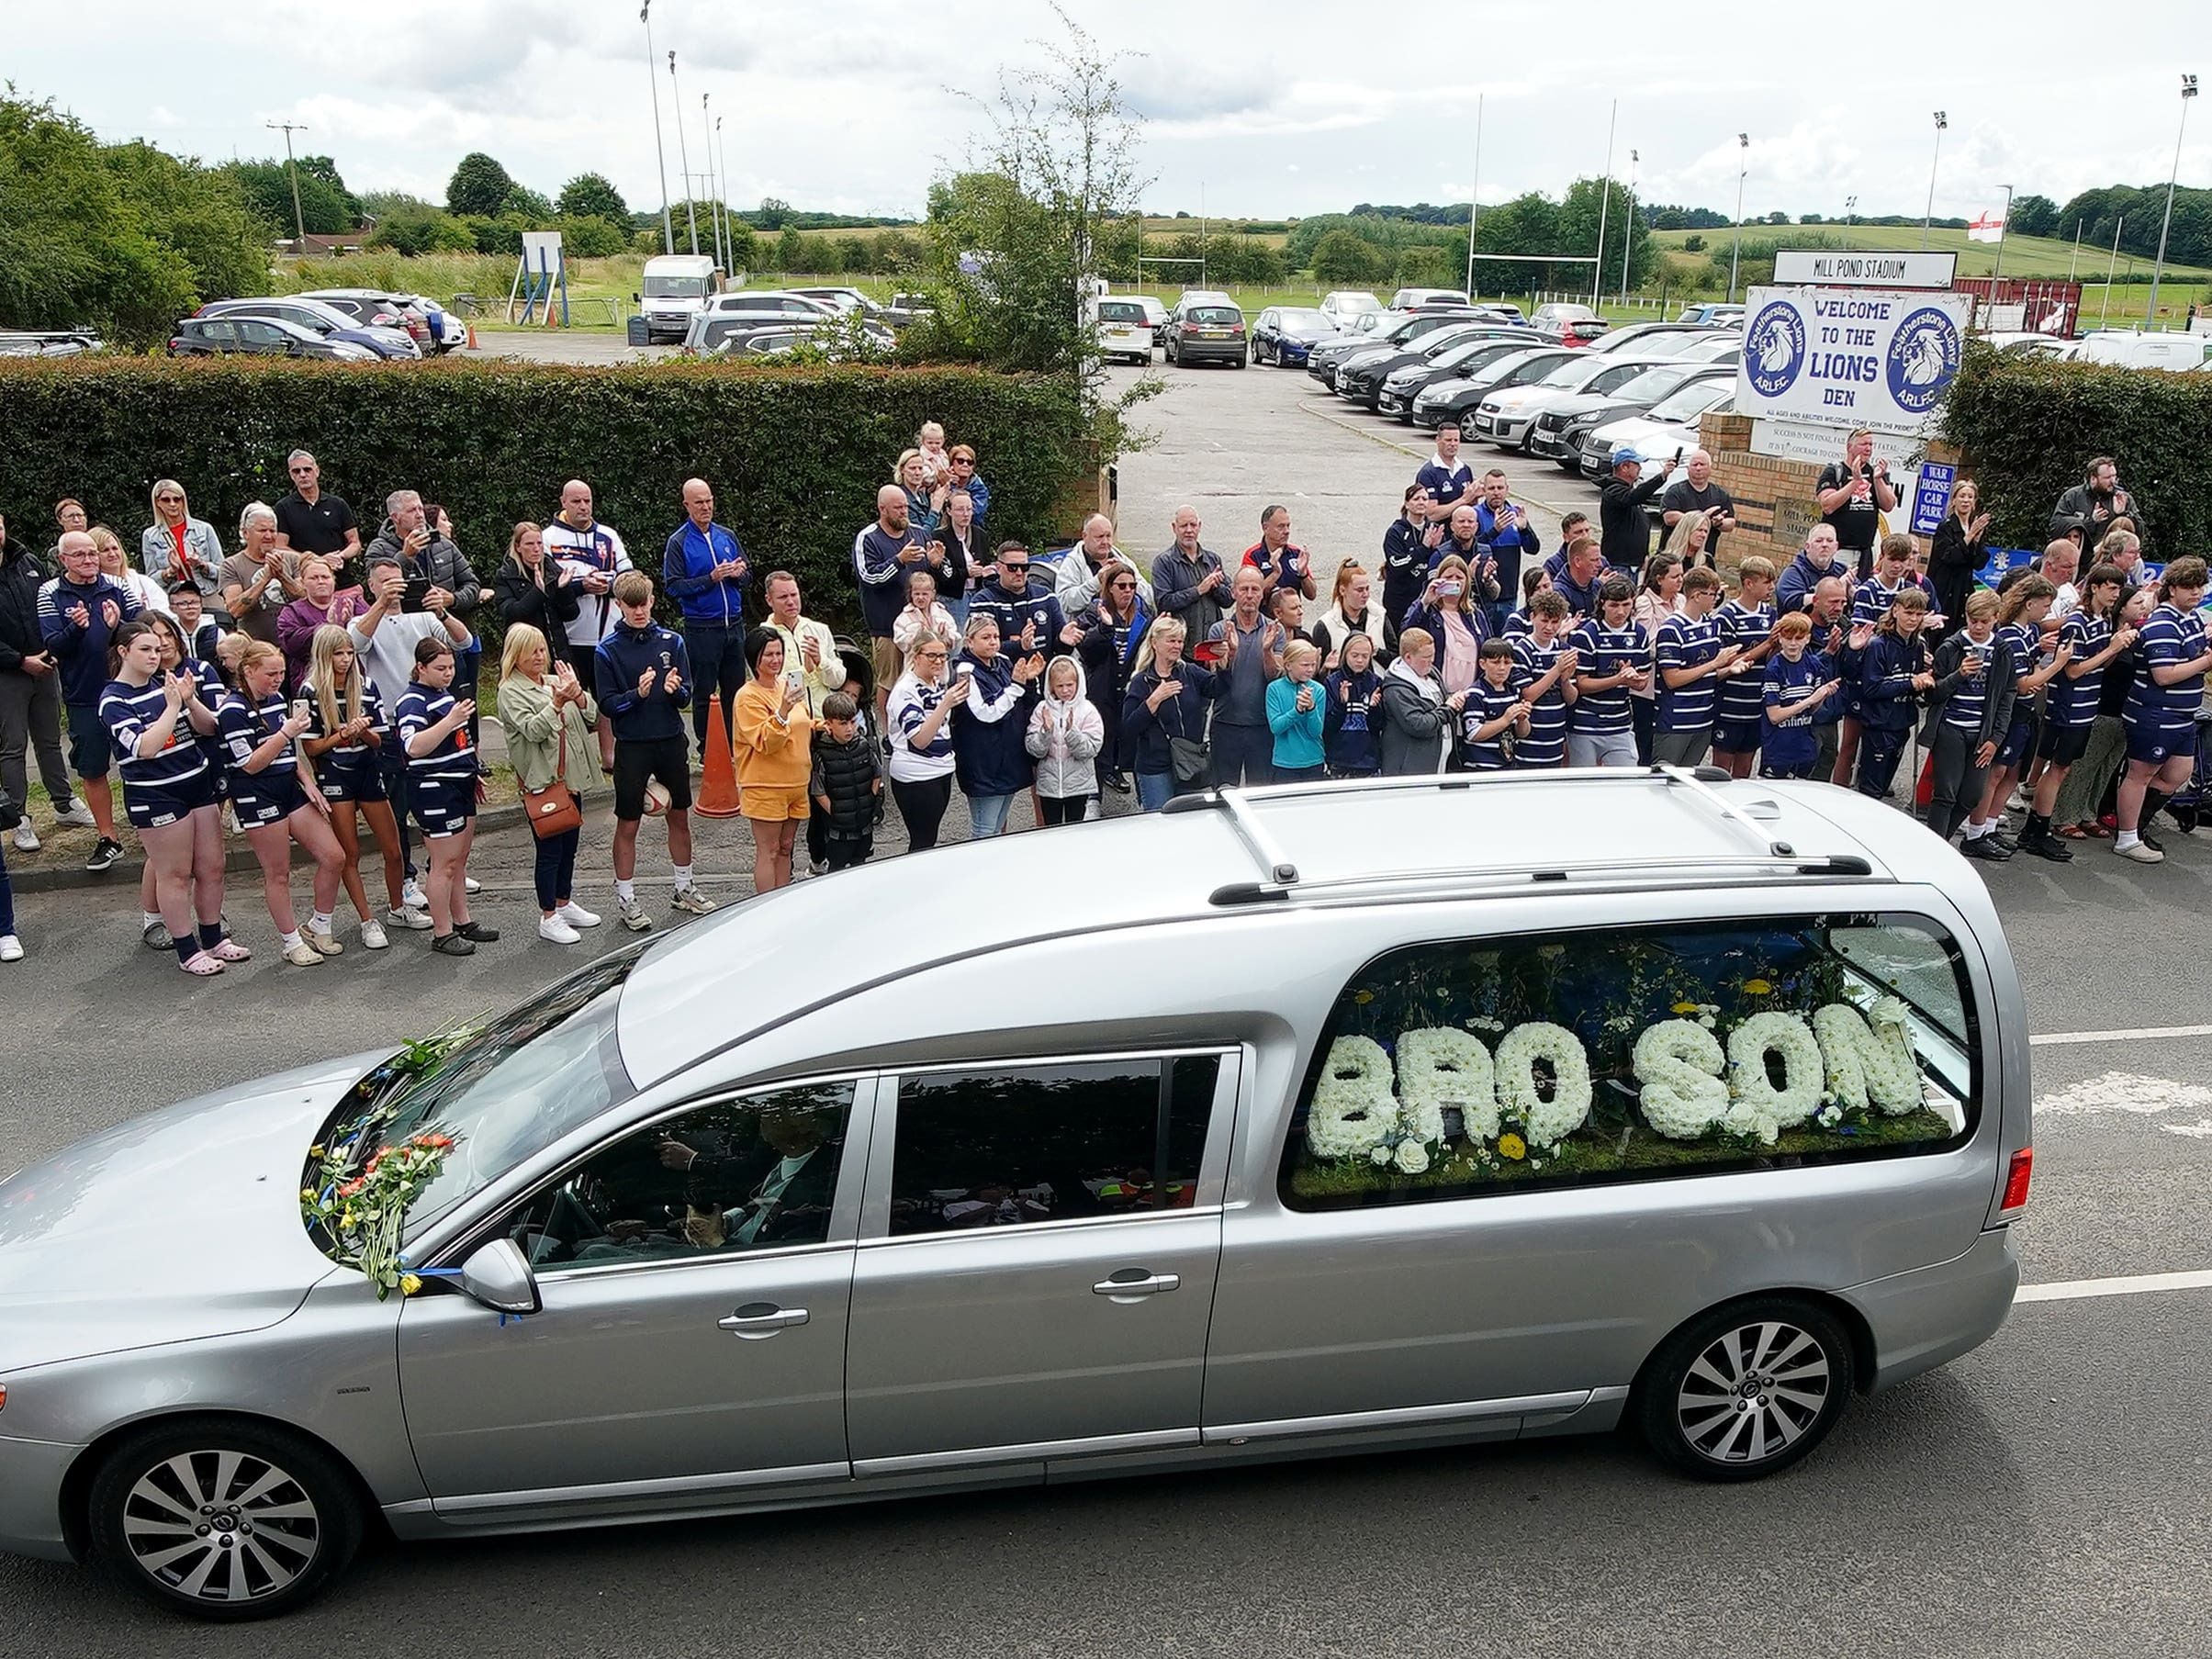 Thousands gather to pay final respects to Rob Burrow on funeral route